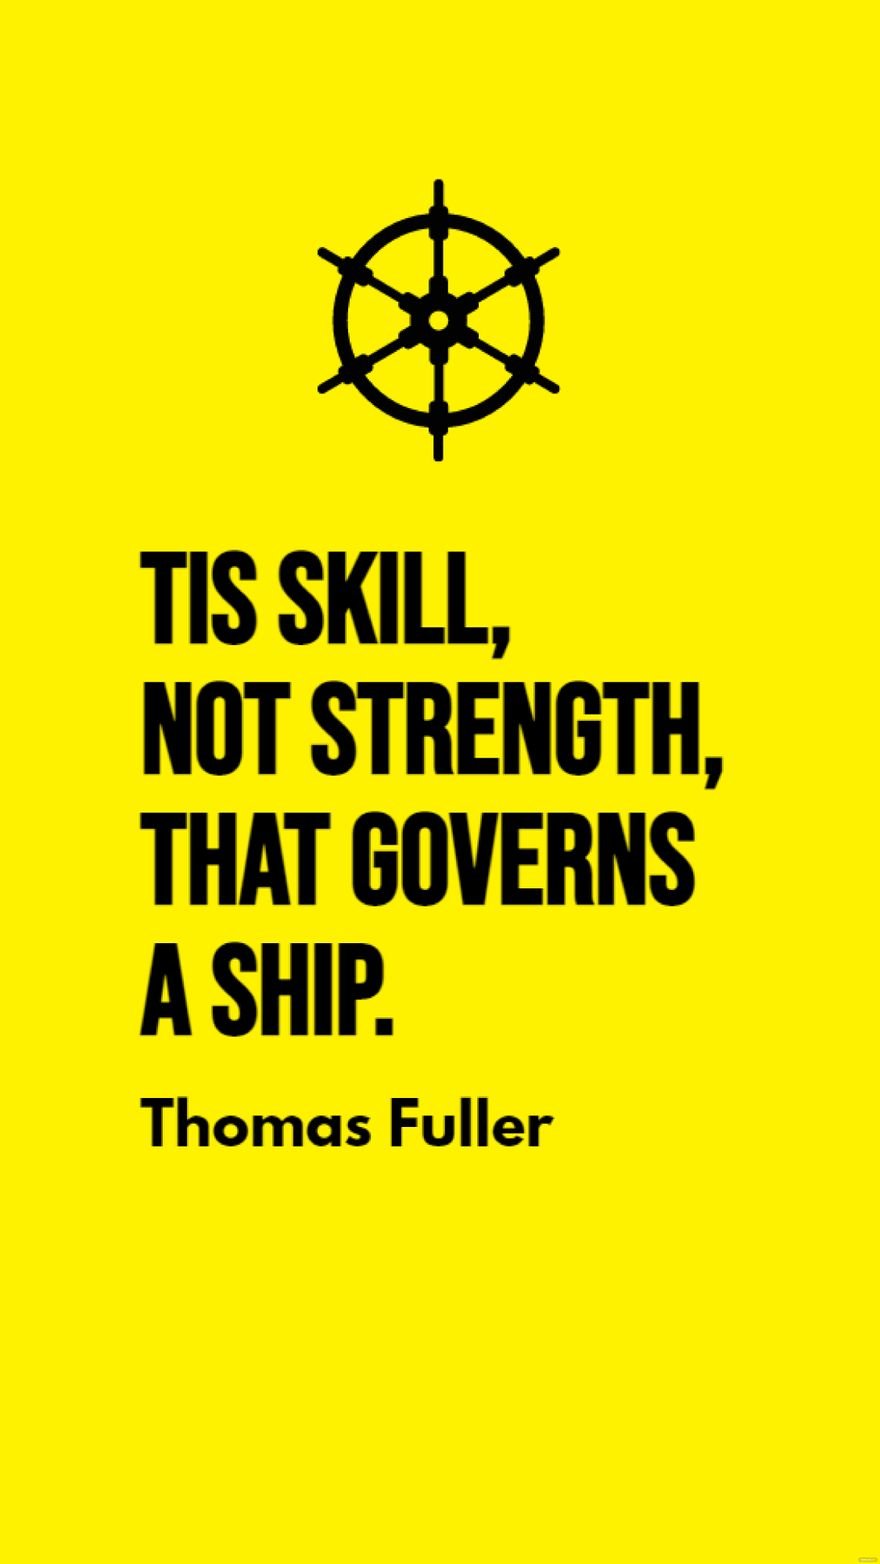 Free Thomas Fuller - Tis skill, not strength, that governs a ship. in JPG